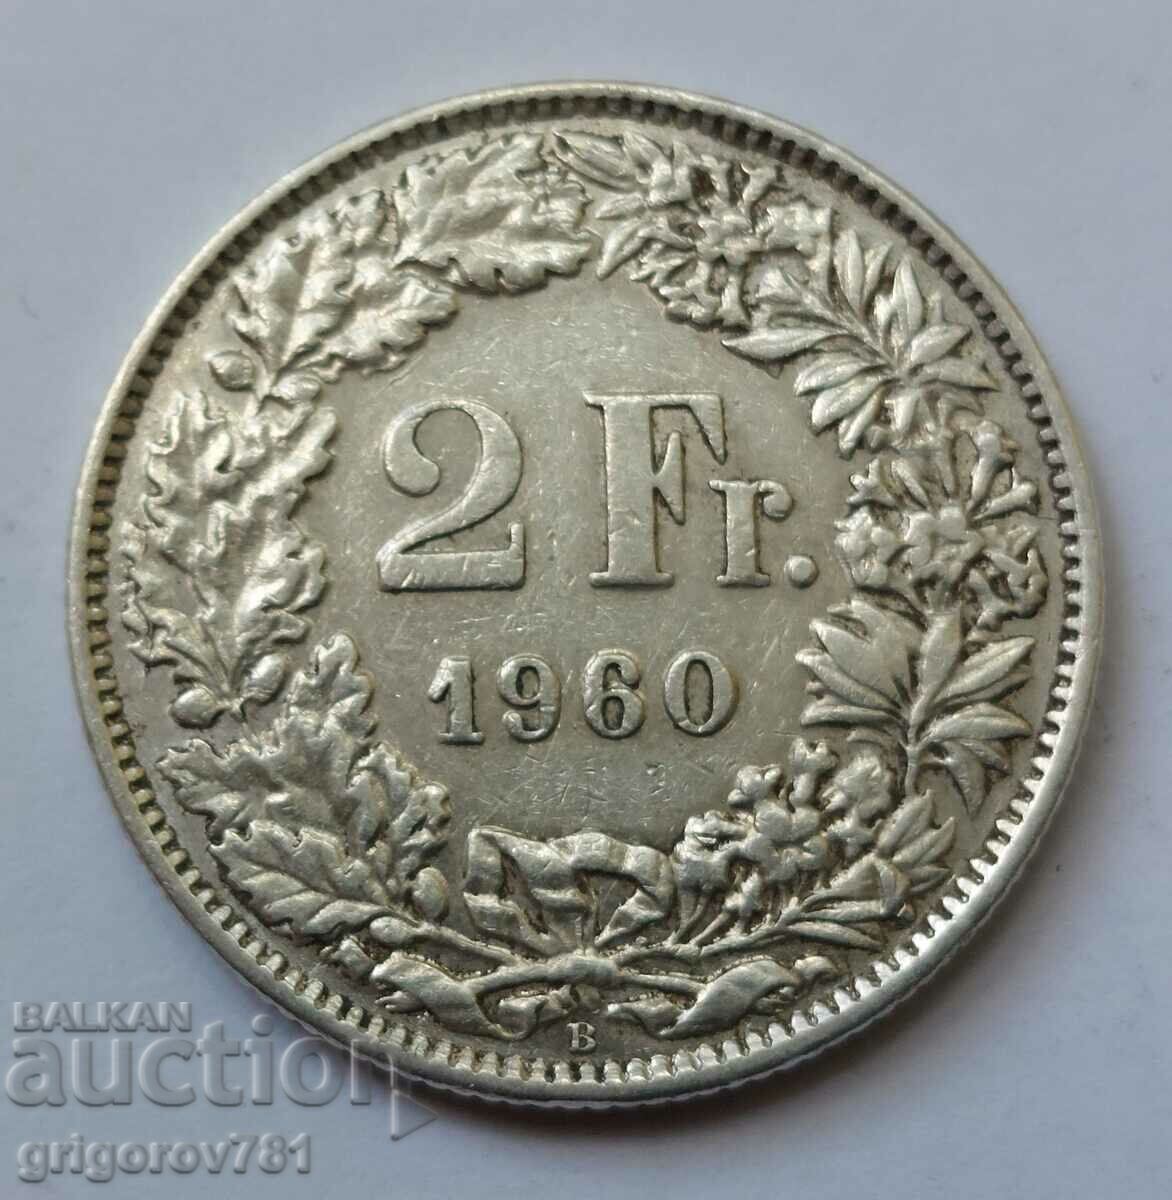 2 Francs Silver Switzerland 1960 B - Silver Coin #11